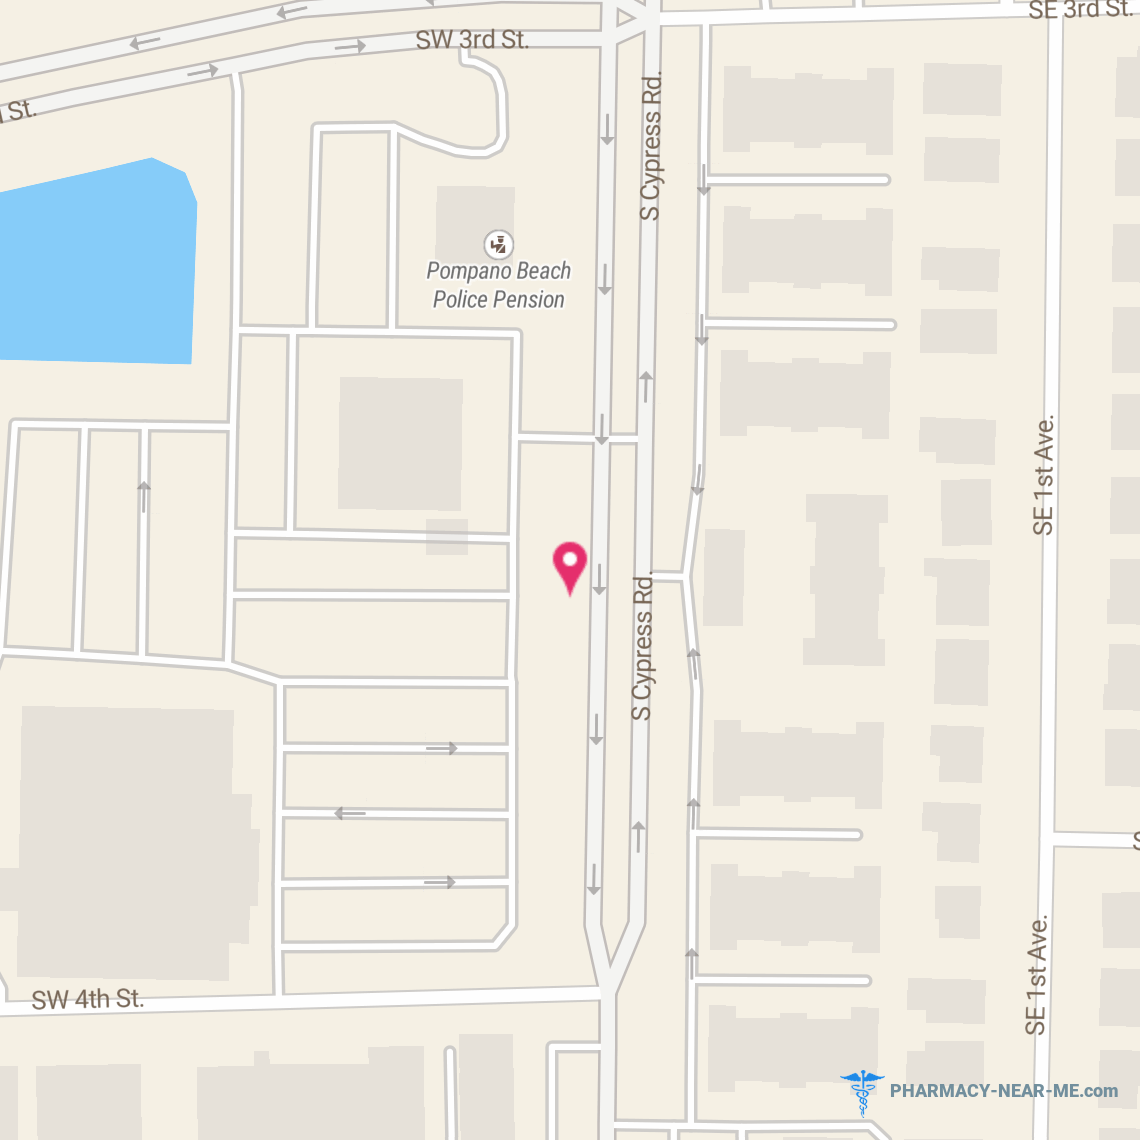 PUBLIX PHARMACY #0693 - Pharmacy Hours, Phone, Reviews & Information: 411 South Cypress Road, Pompano Beach, Florida 33060, United States